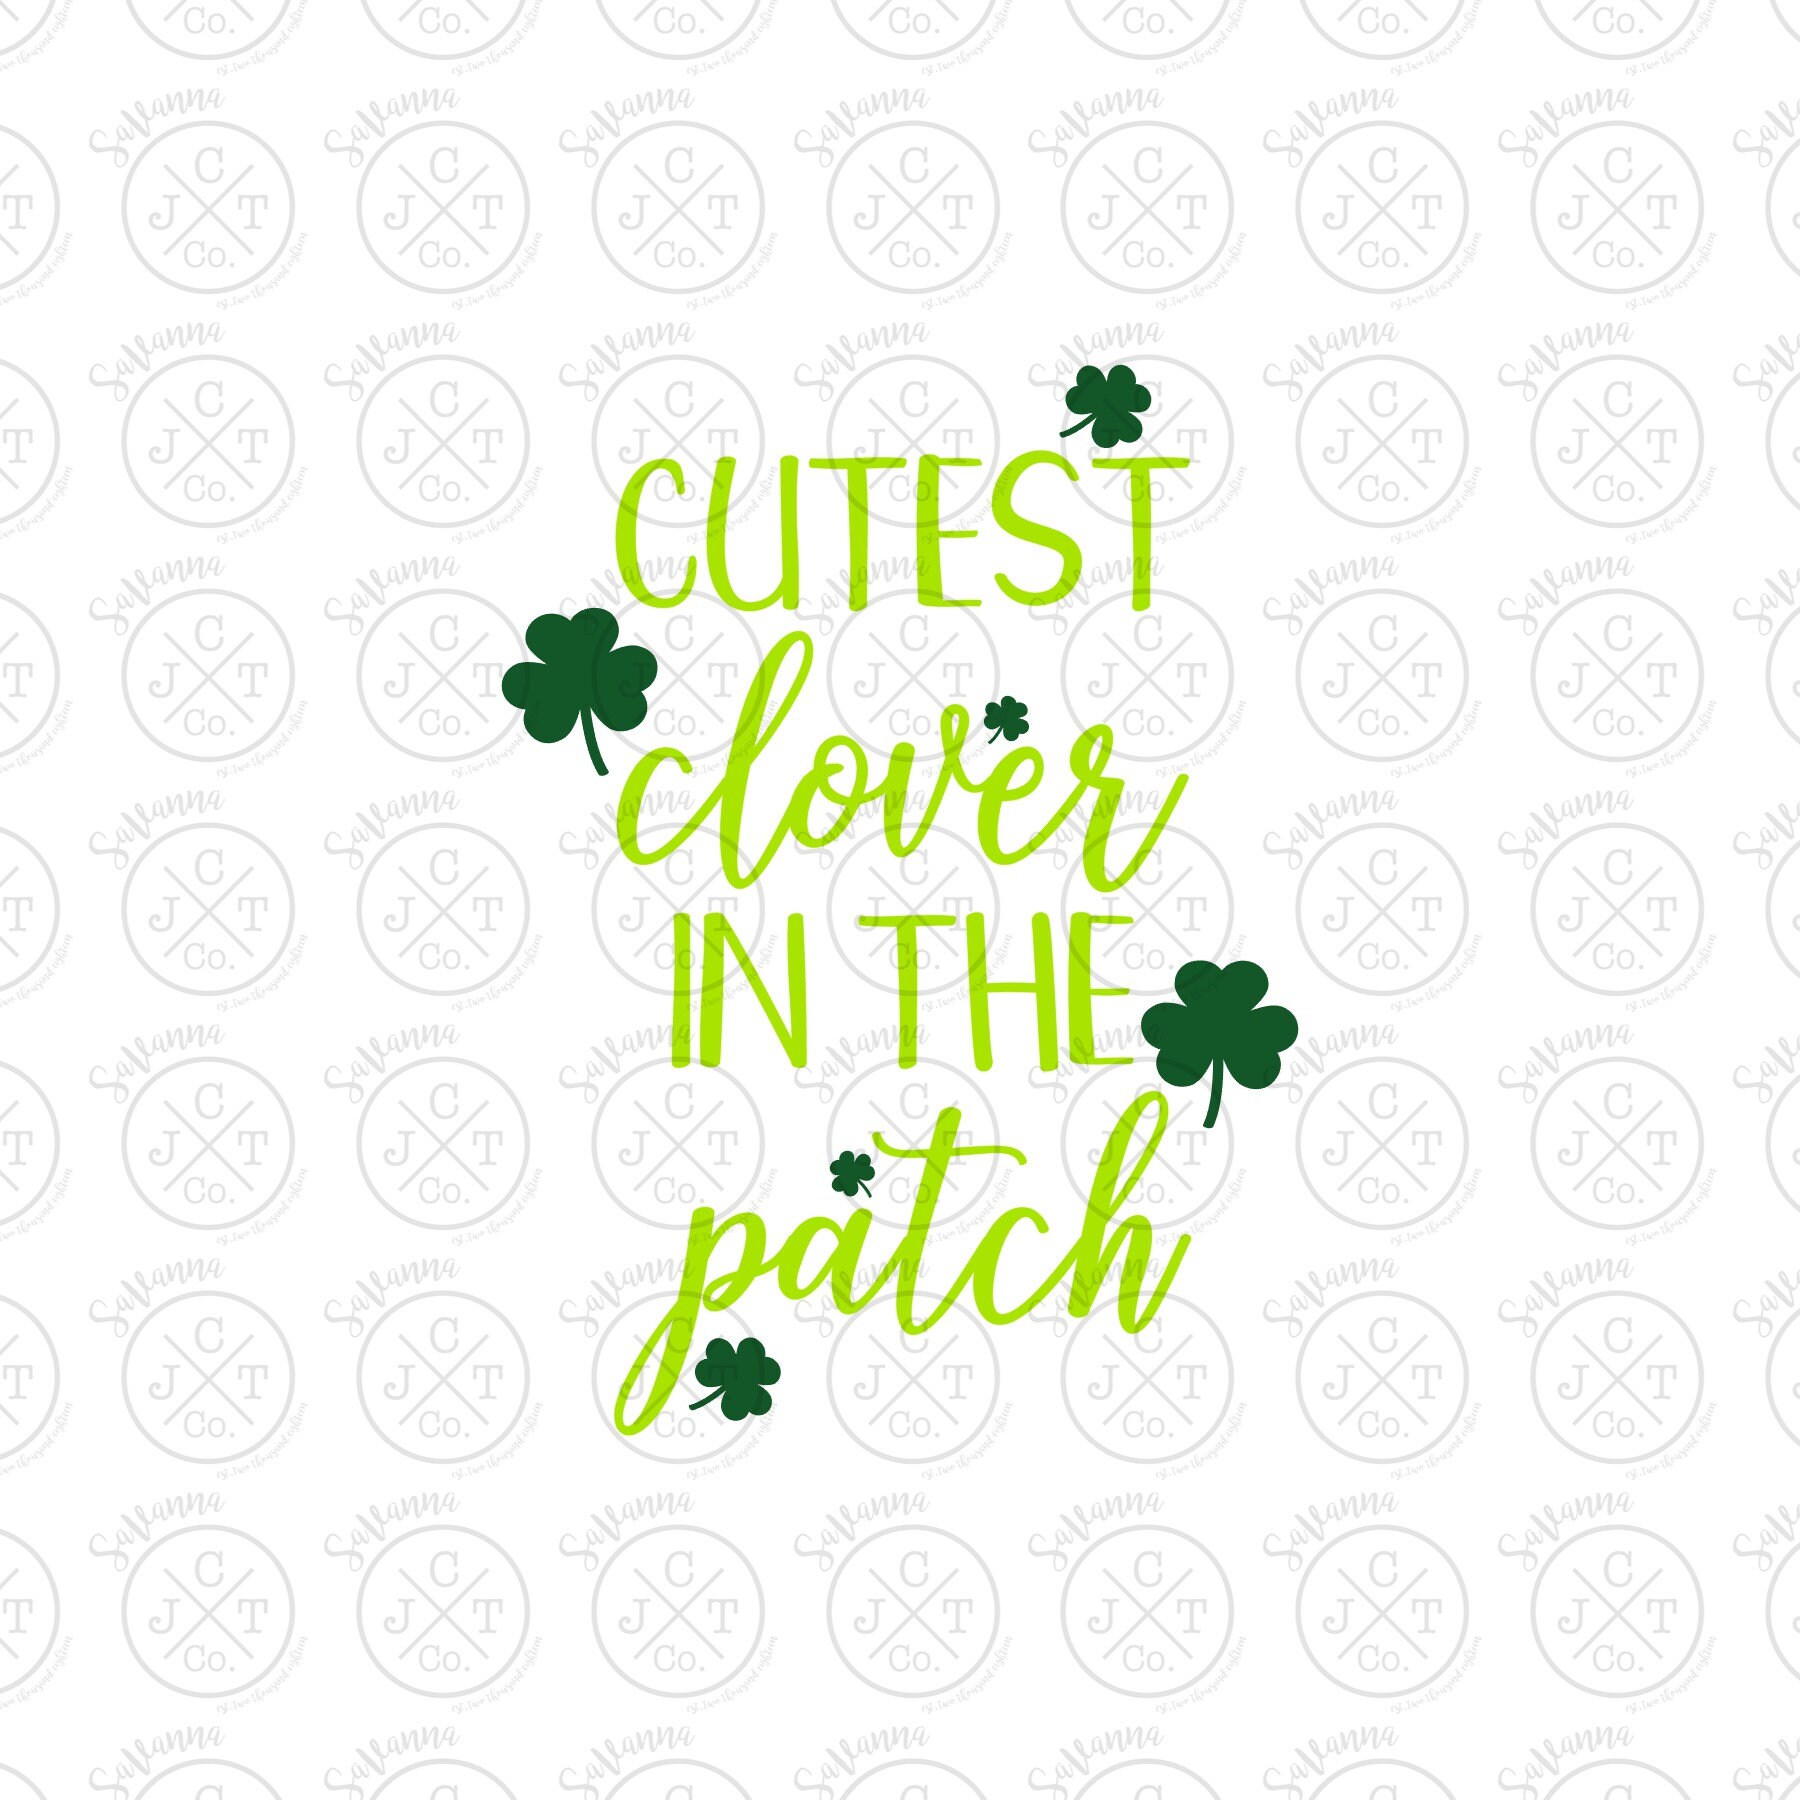 Download Cutest Clover in the Patch SVG DXF JPEG St. Patrick's | Etsy